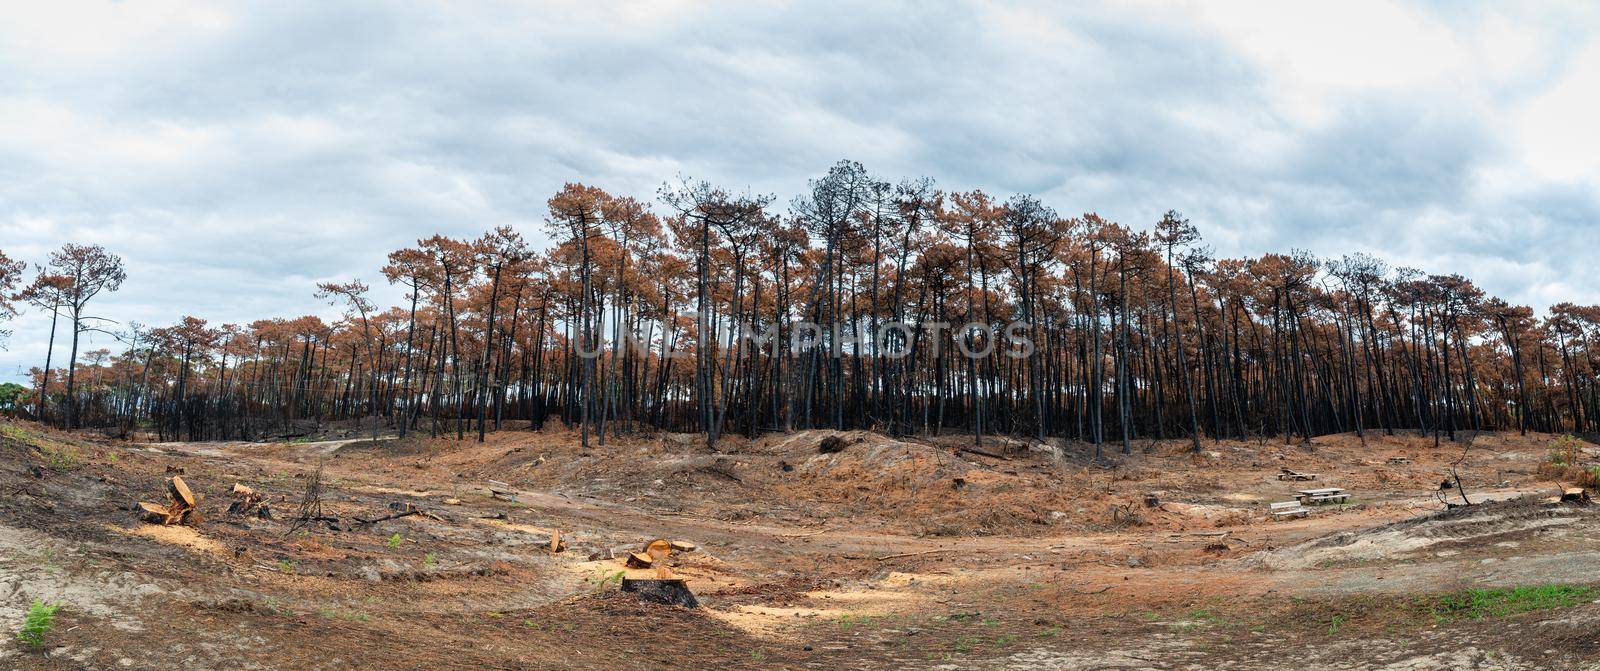 The Chiberta forest a few weeks after the fire, in France by dutourdumonde